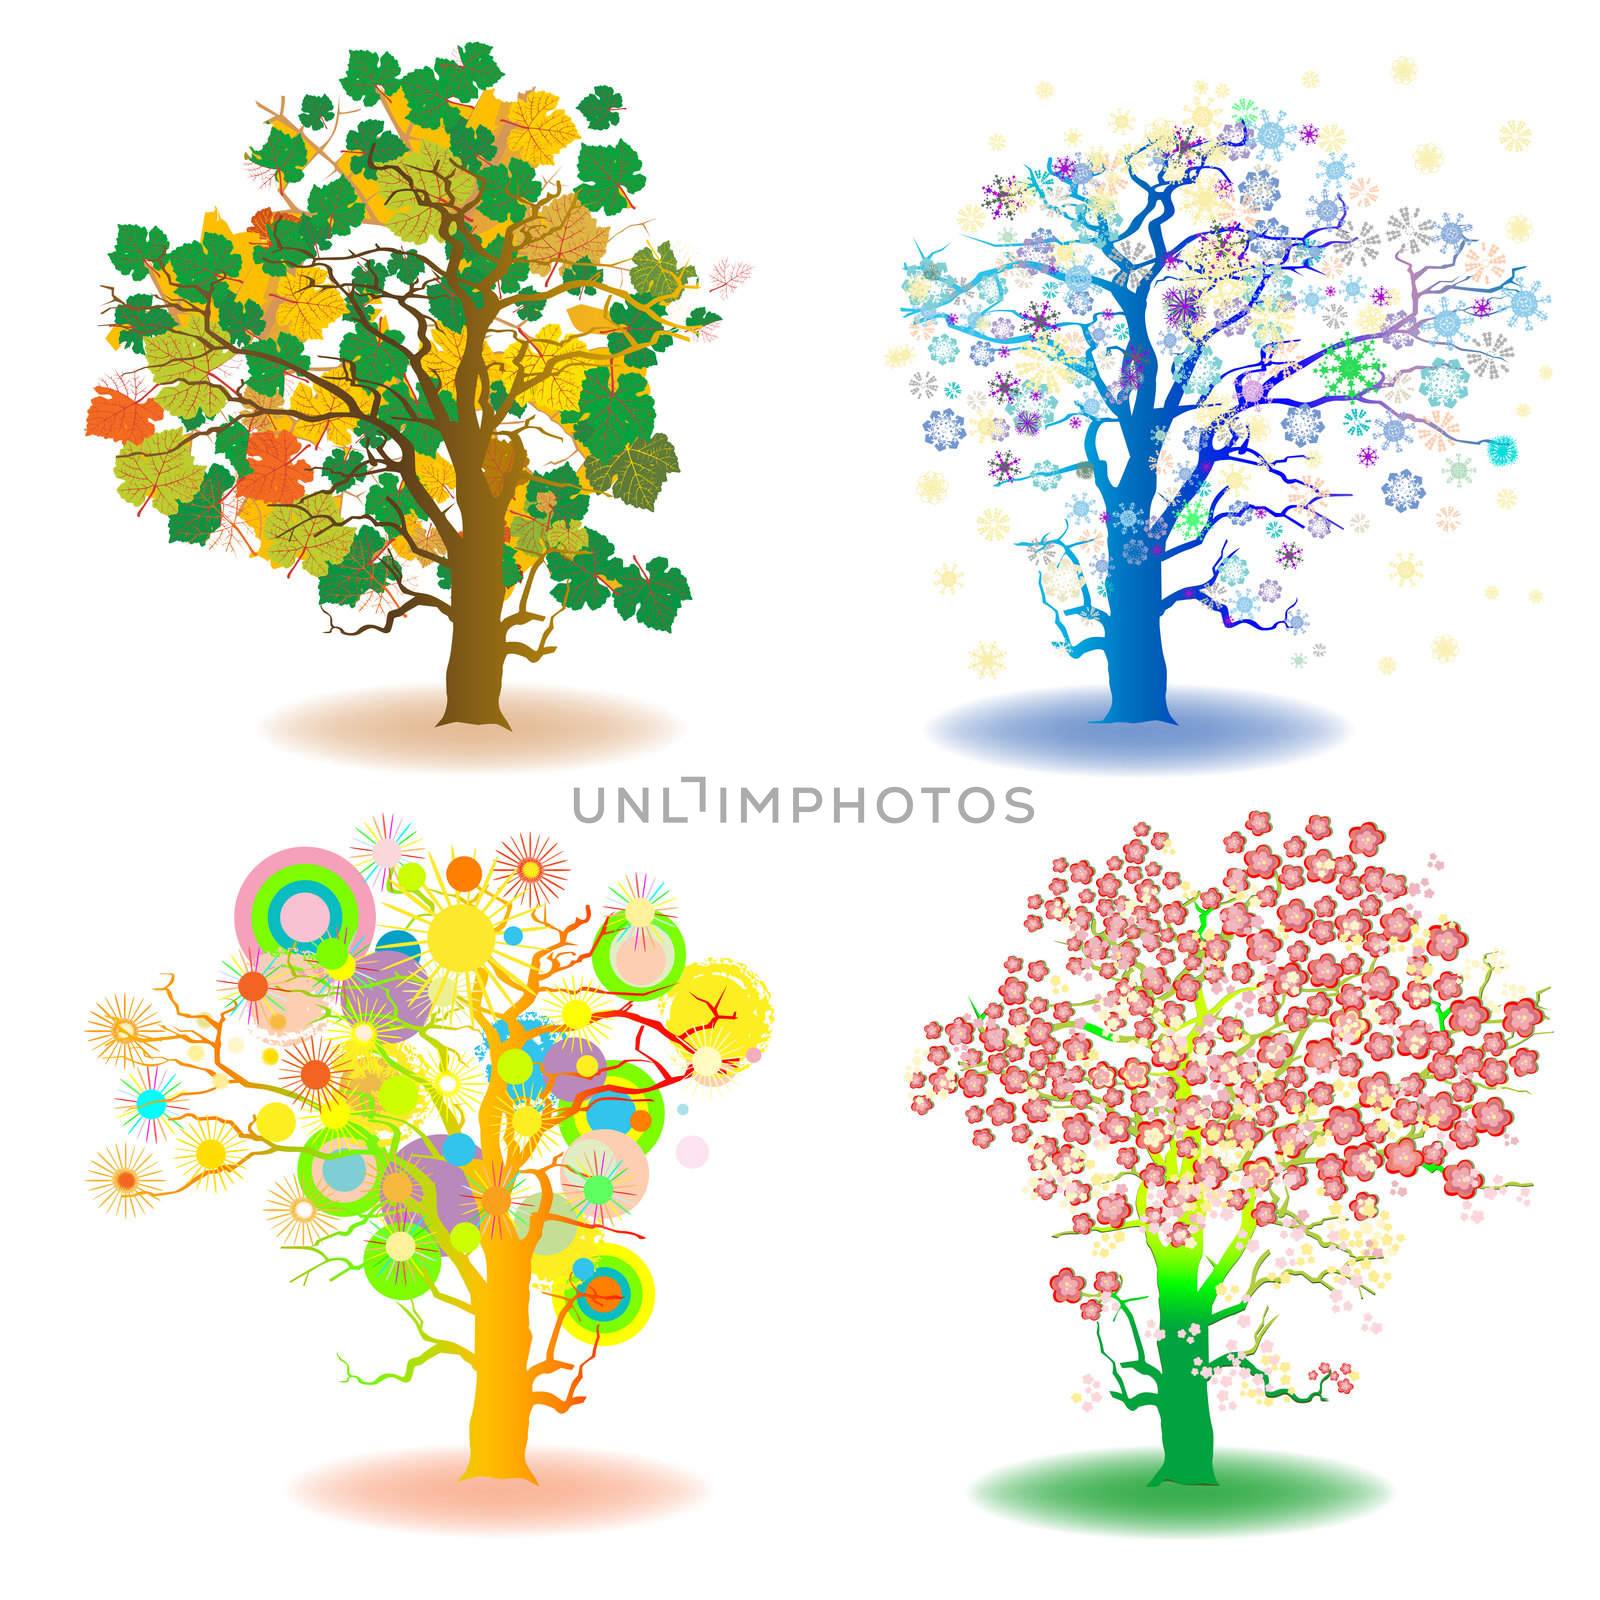 four seasons trees, winter, spring, summer, autumn, artistic icons